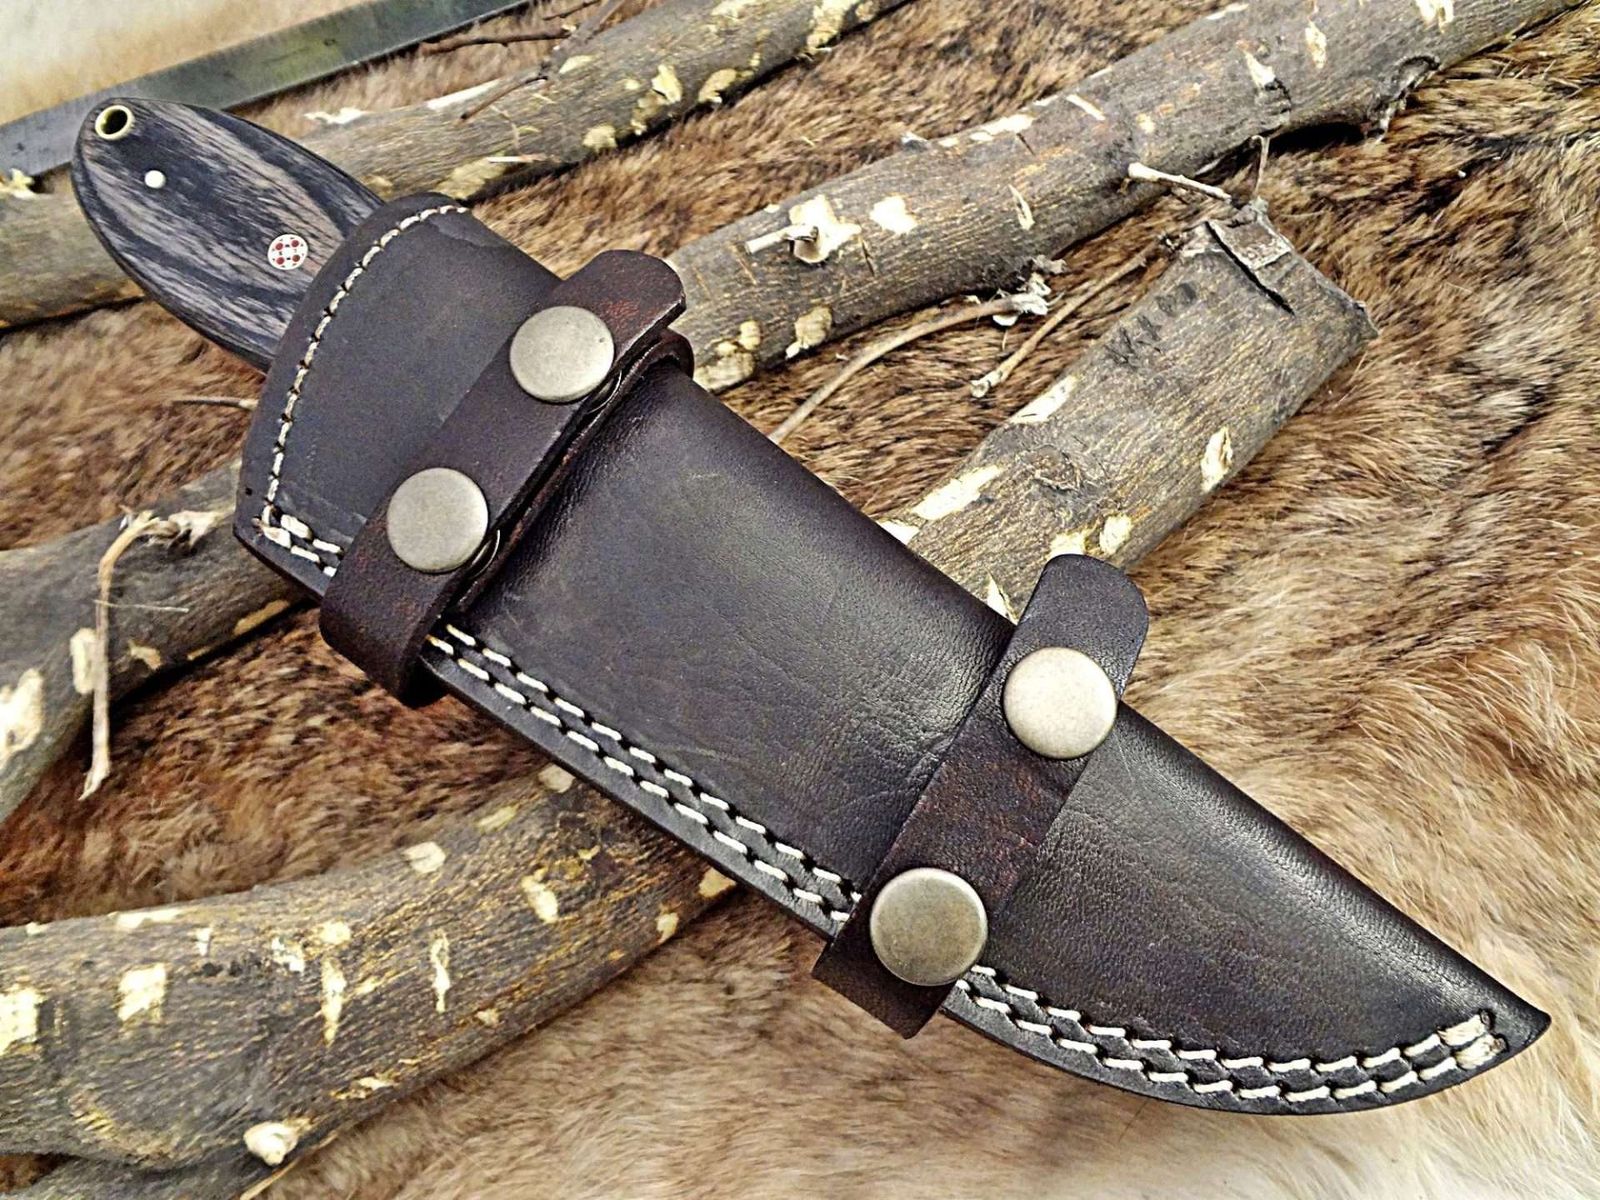 8 Long skinning knife, 4 full tang gut hook blade, hand forged Damascus  steel, available in 3 scales, includes Cow Leather sheath - Damacus Depot,  Inc.